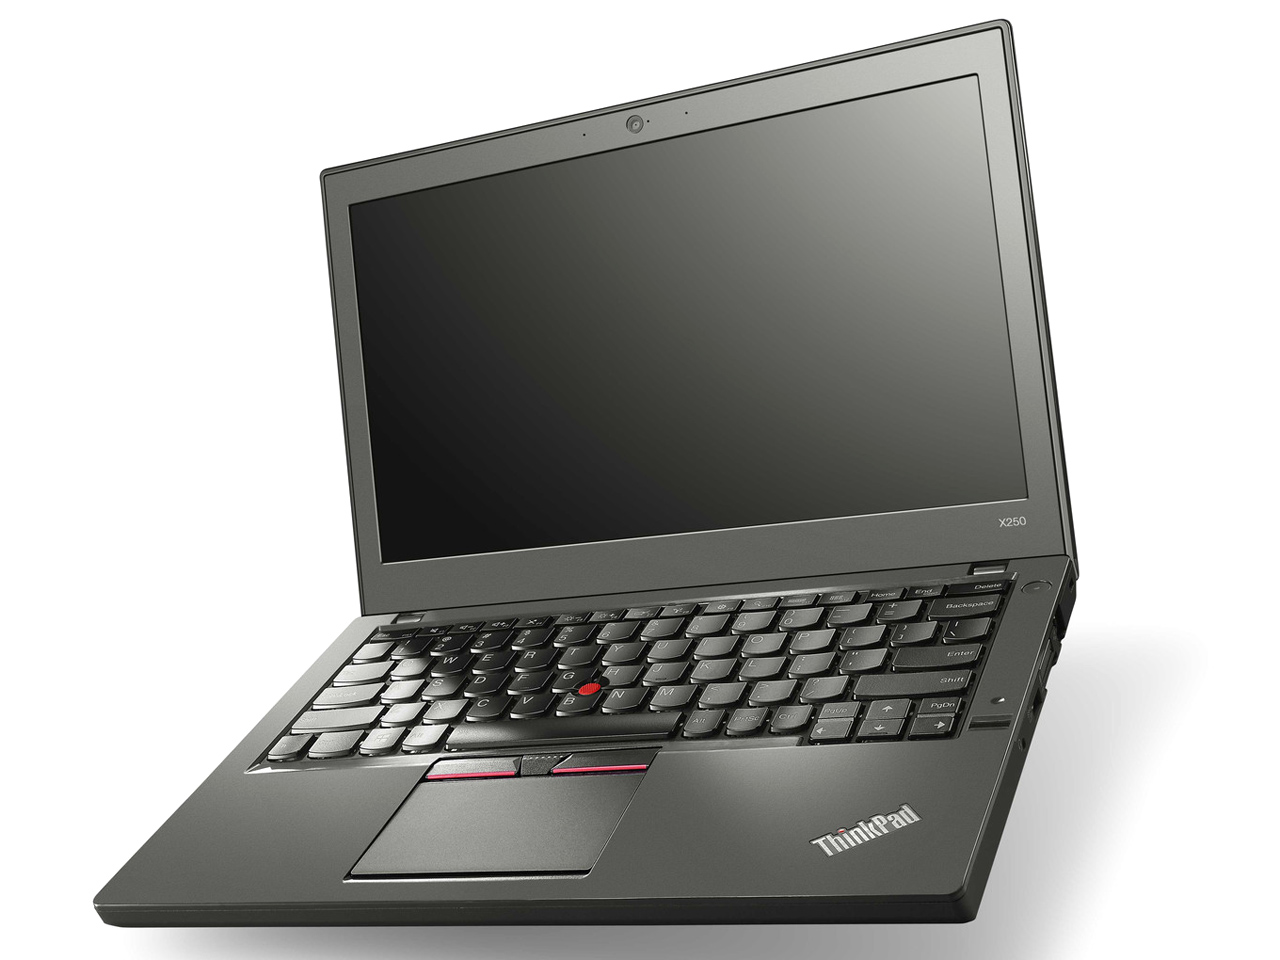 First Ever Laptop First Impressions: Lenovo Thinkpad X250 Notebook Review